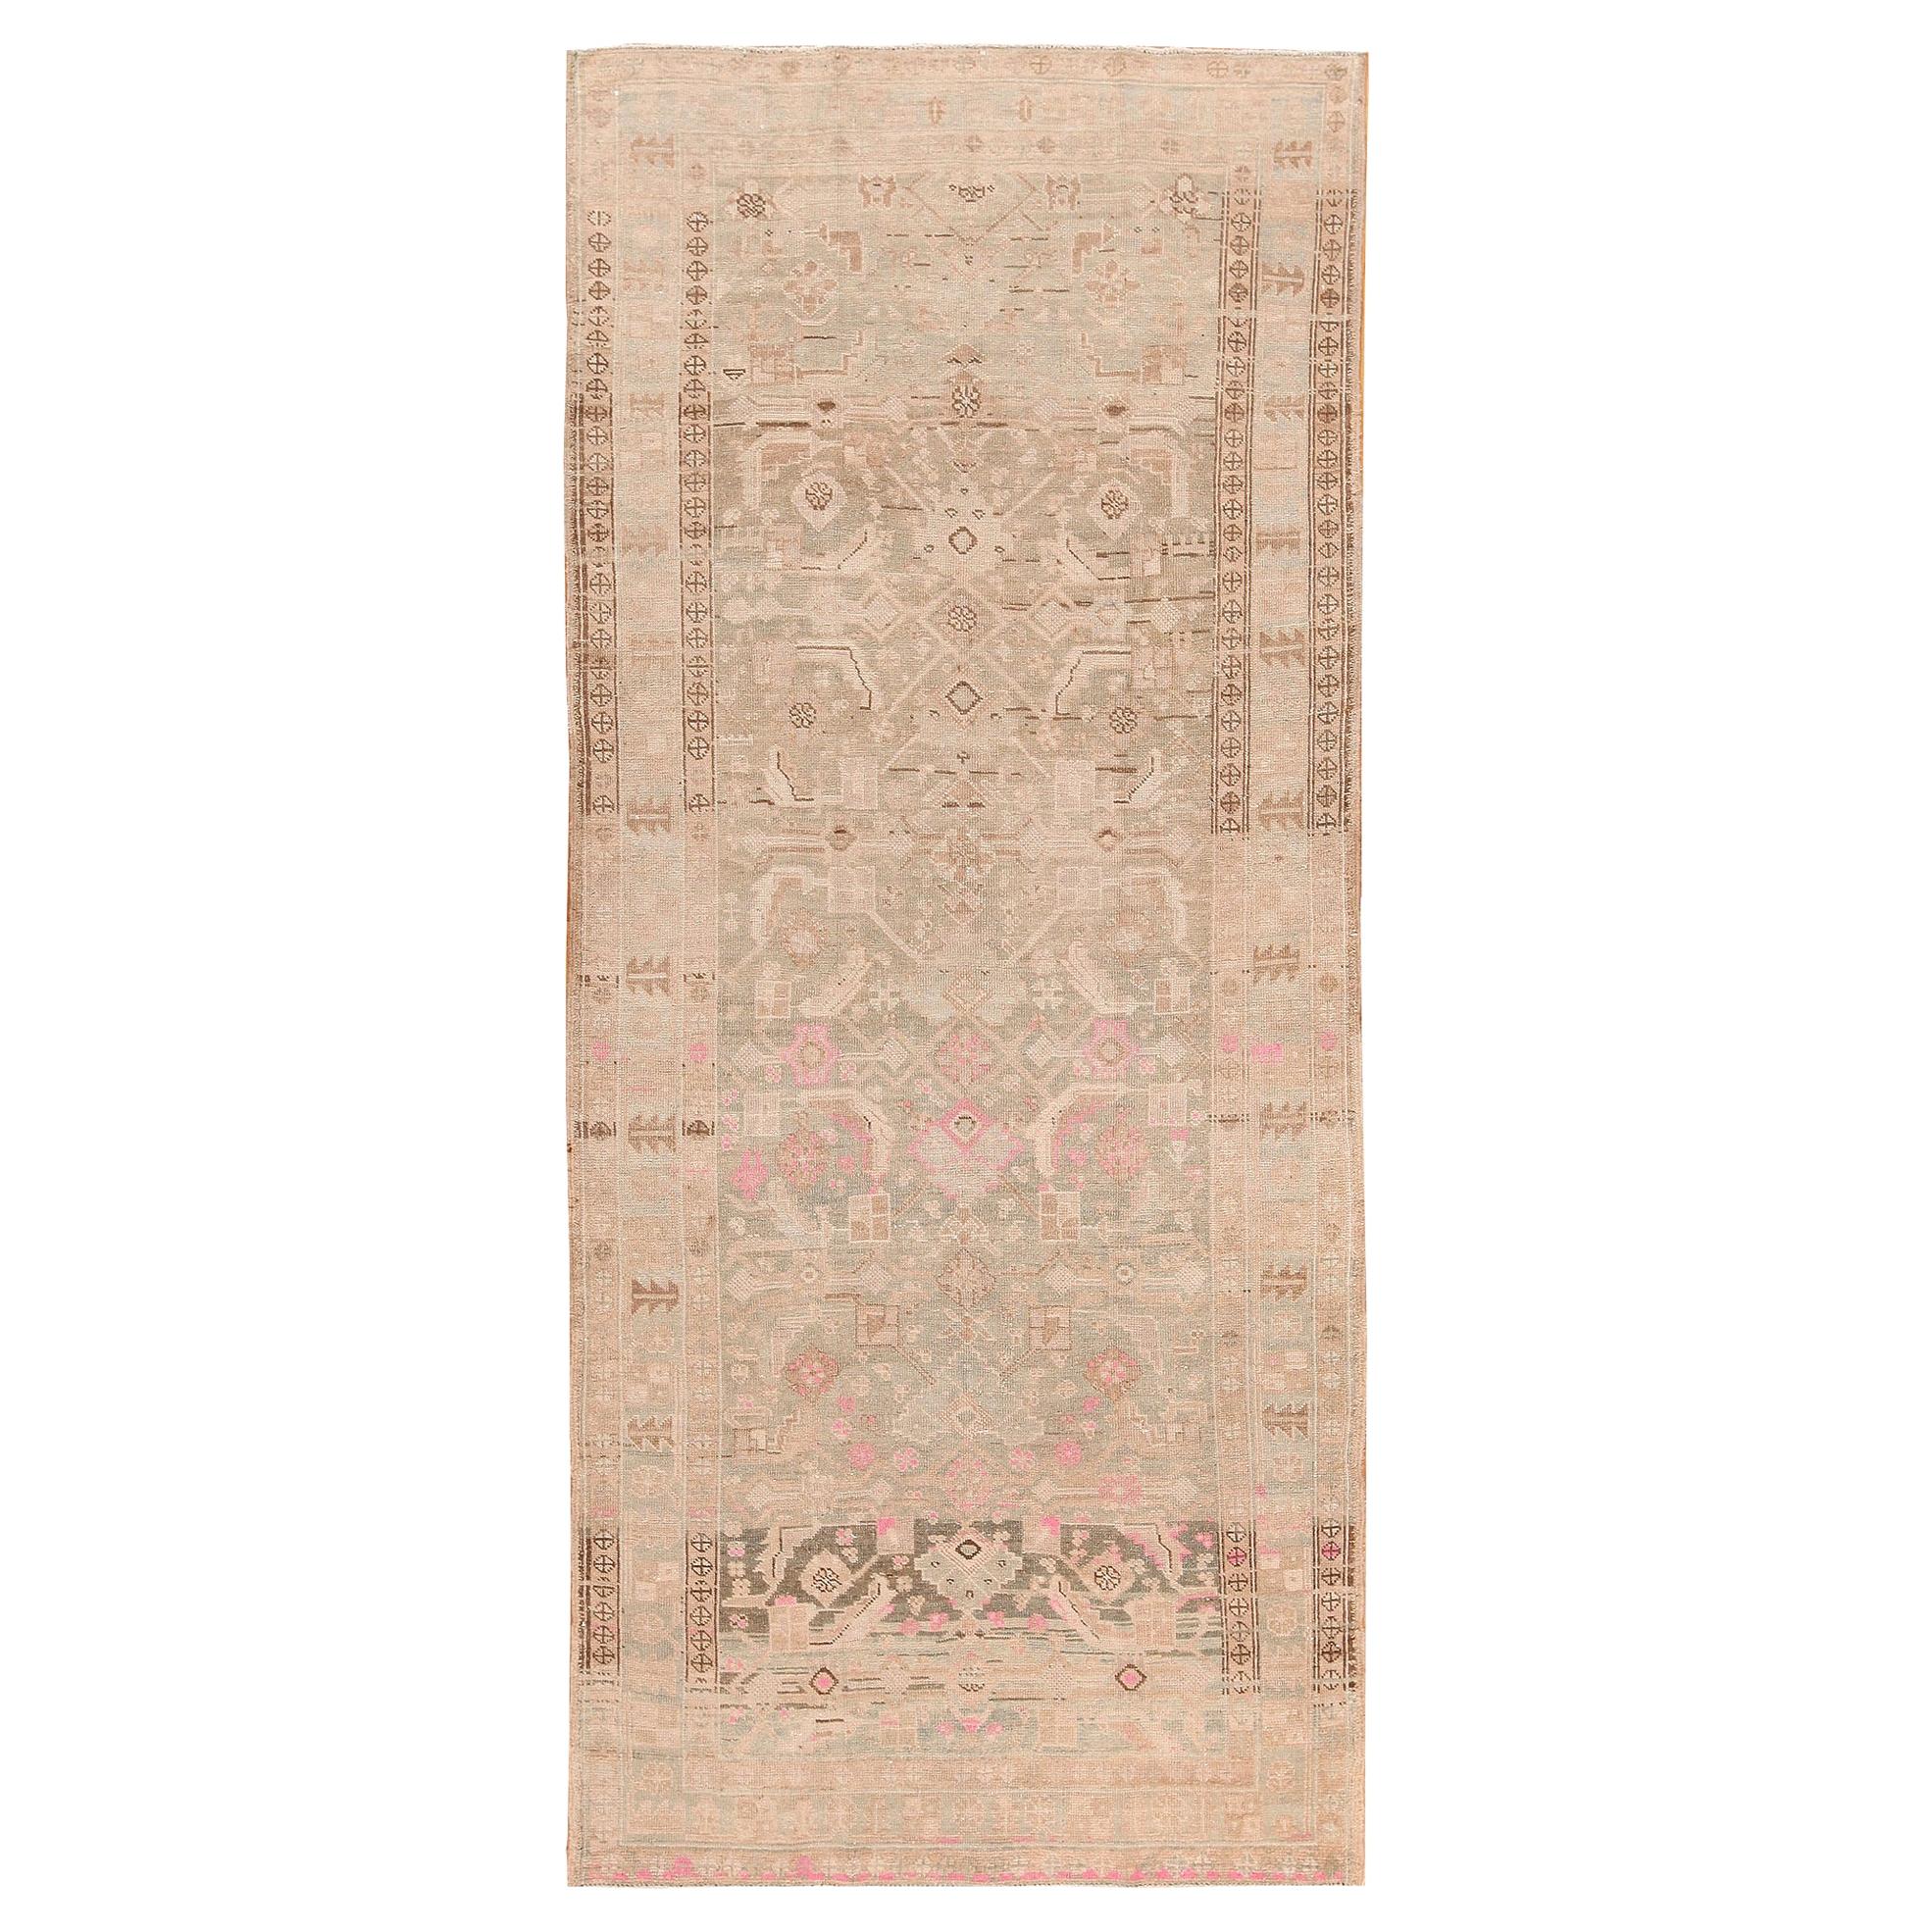 Antique Persian Malayer Runner. Size: 4 ft 1 in x 9 ft 8 in